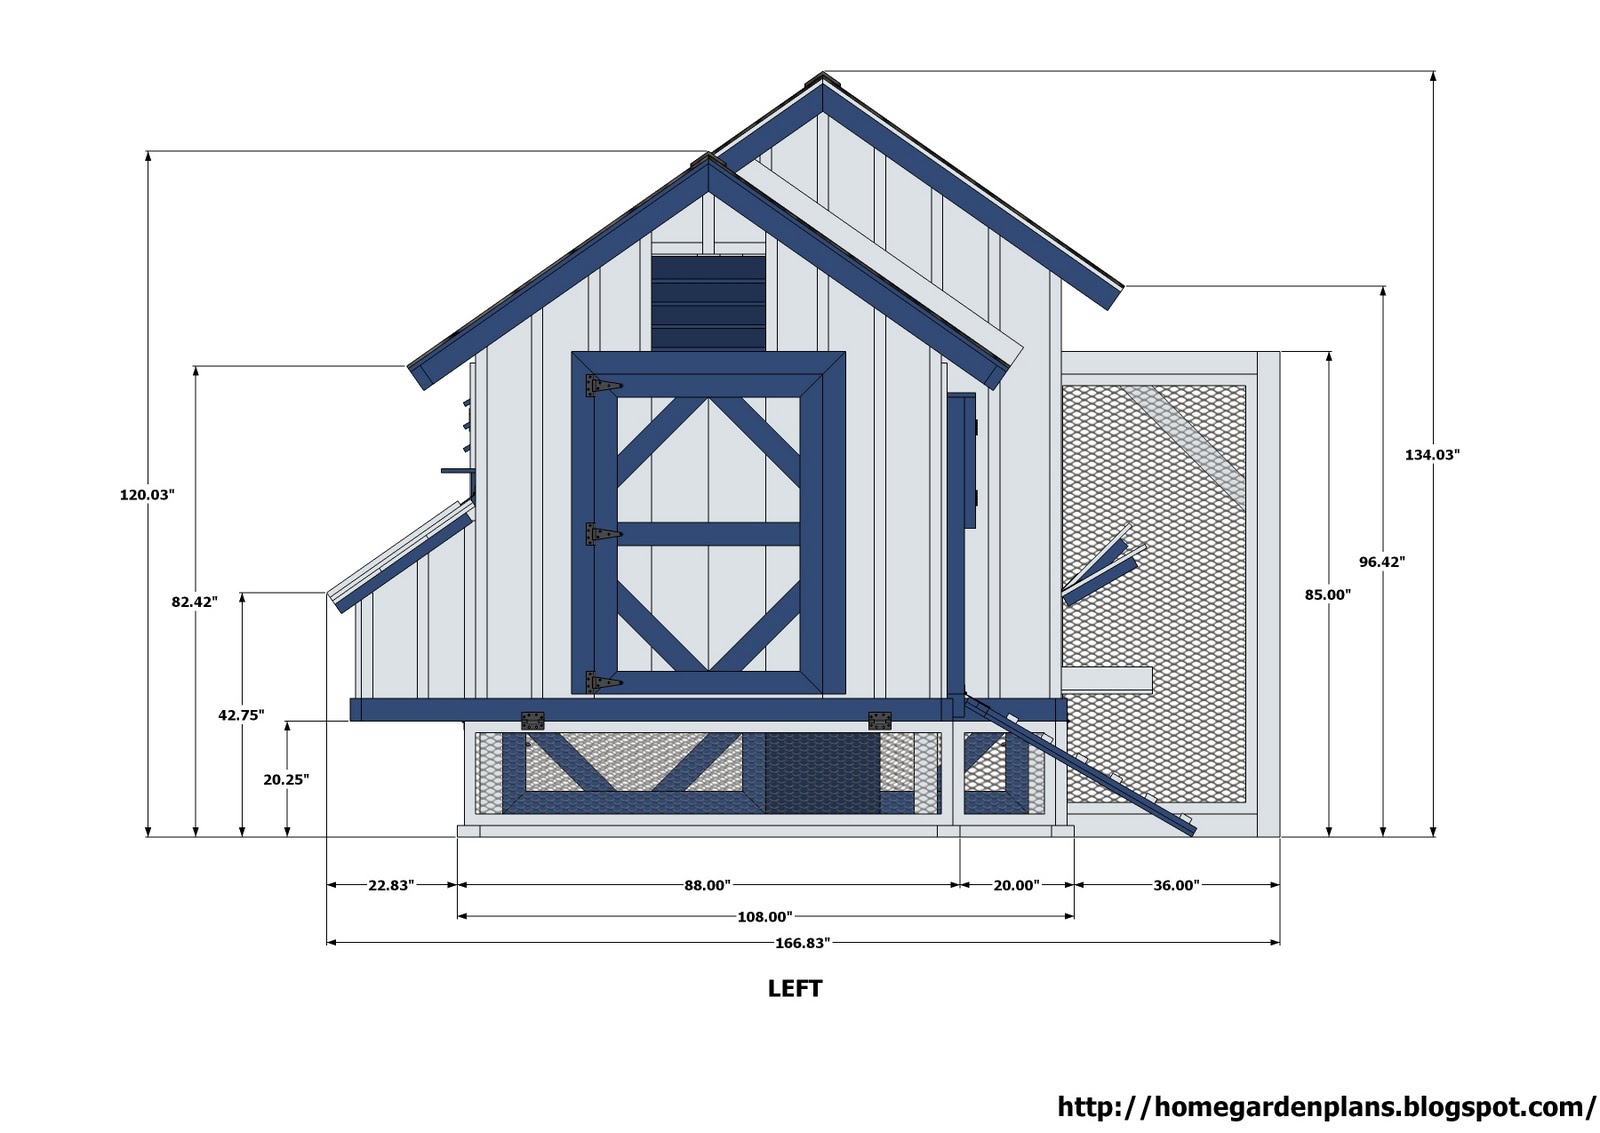 L200 - Large Chicken Coop Plans - How to Build a Chicken Coop 